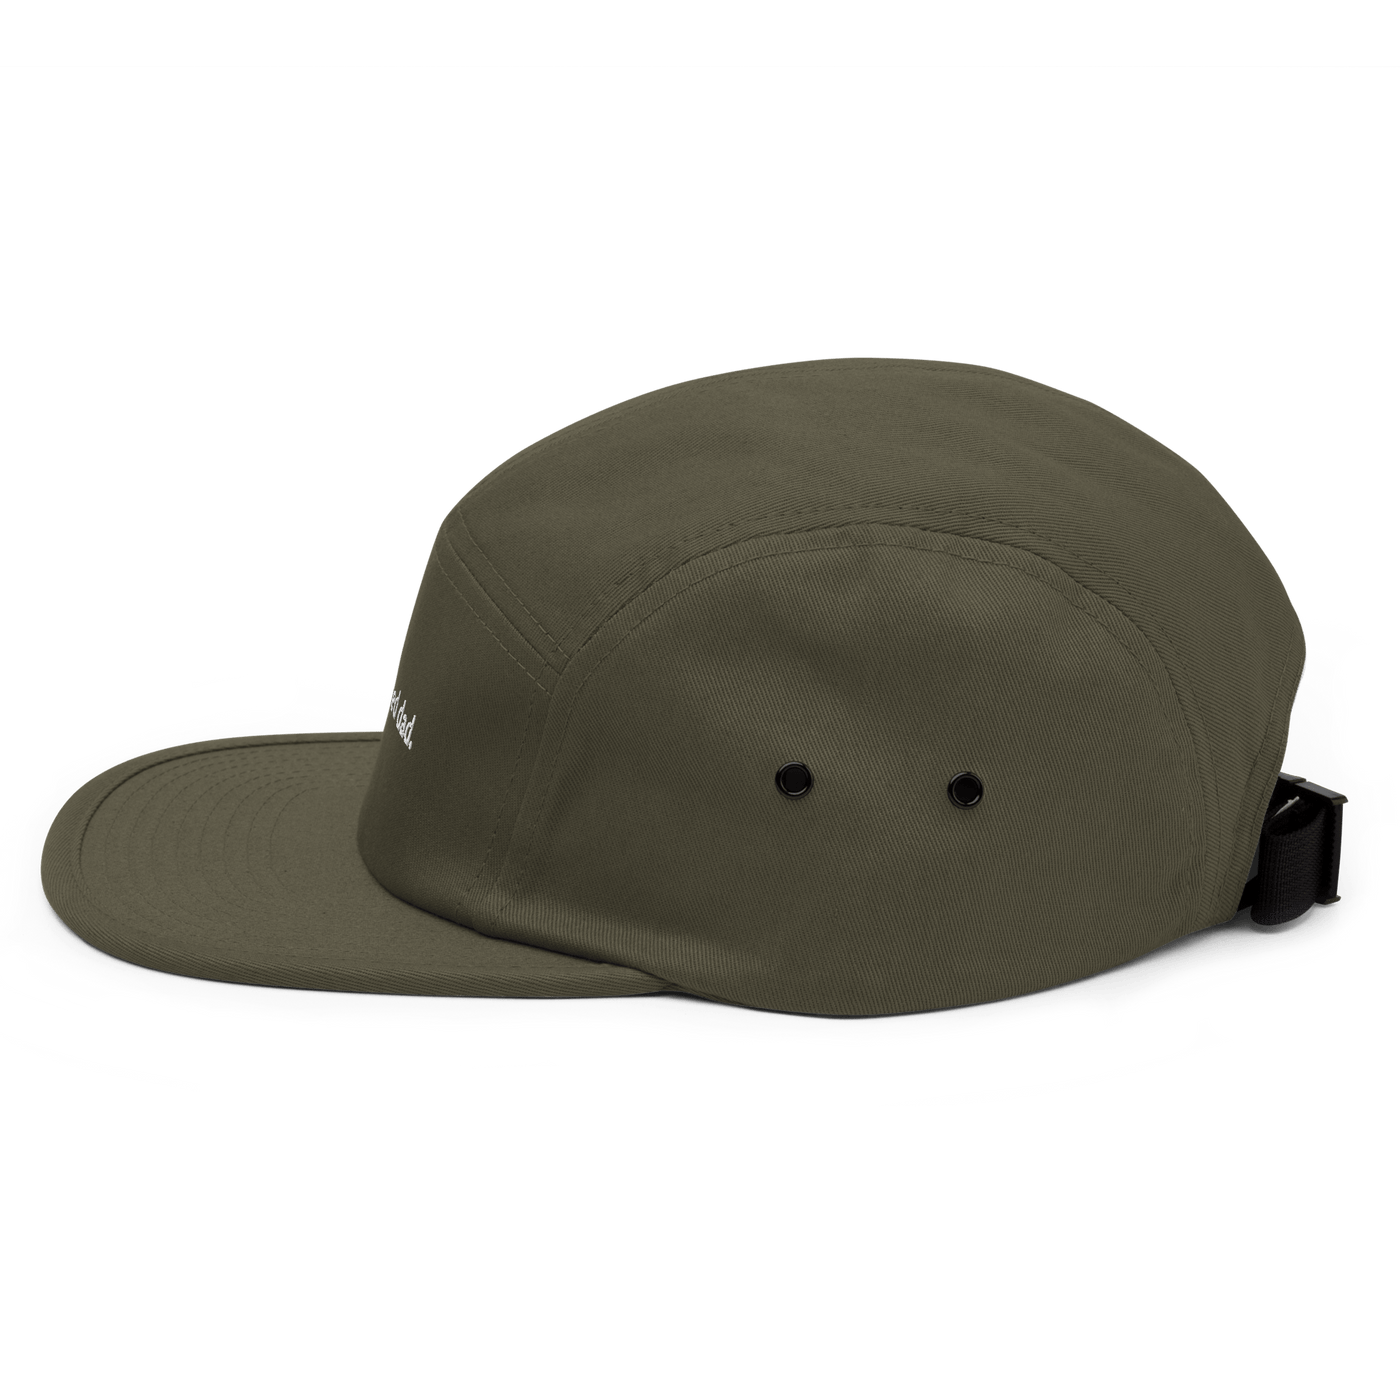 Tired dad Five Panel Hat - Olive - - Just Another Cap Store